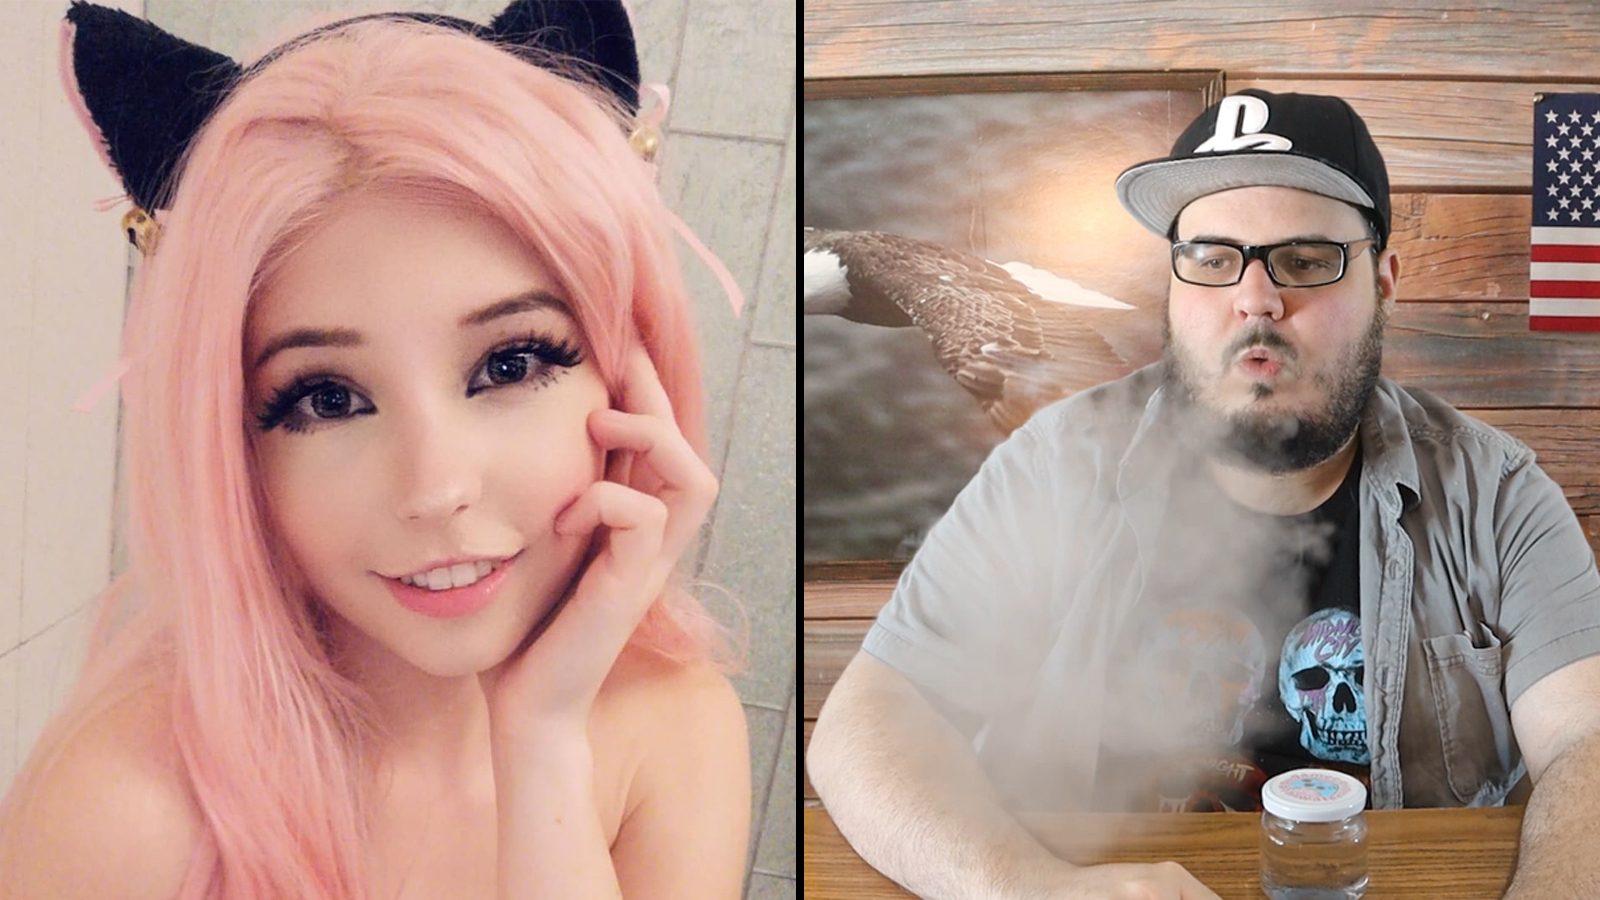 r 'vapes' Belle Delphine's bath water – But was it real? - Dexerto